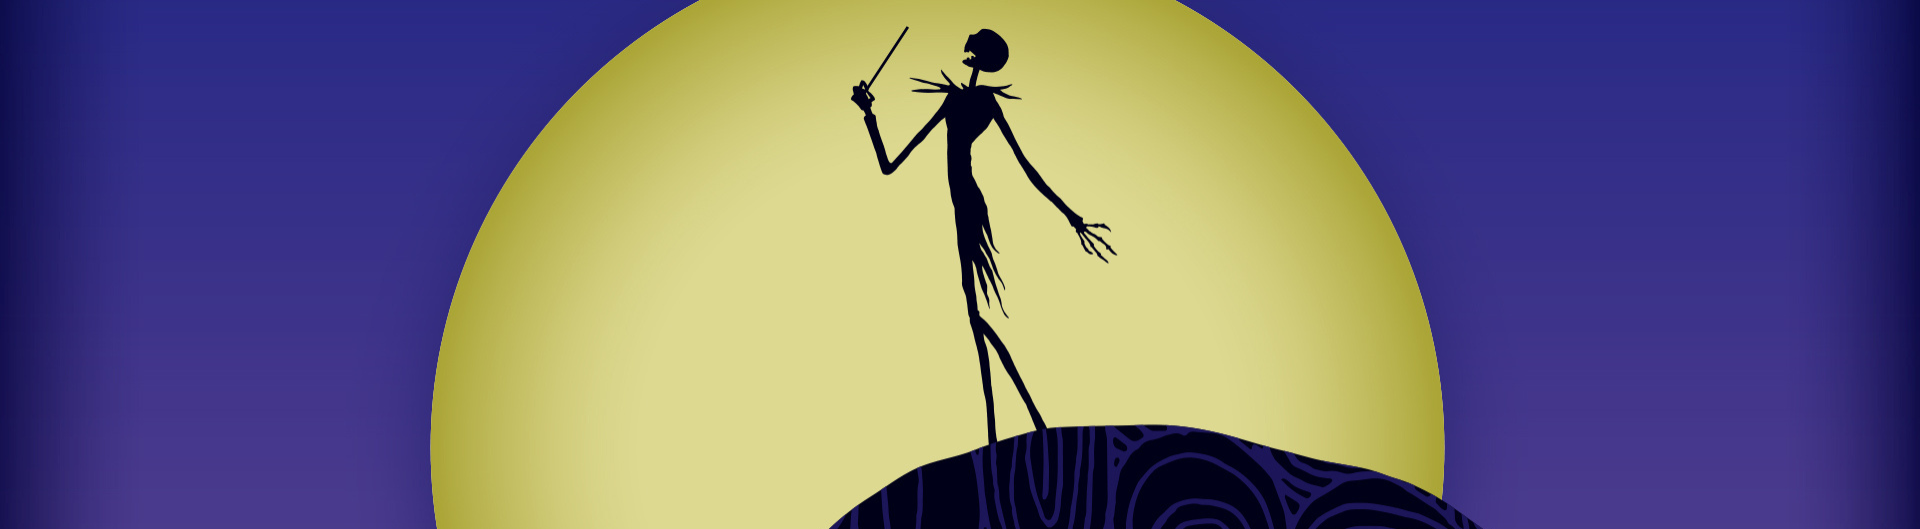 The Nightmare Before Christmas in Concert is coming to Darling Harbour Theatre, ICC Sydney on 2 November 2024.